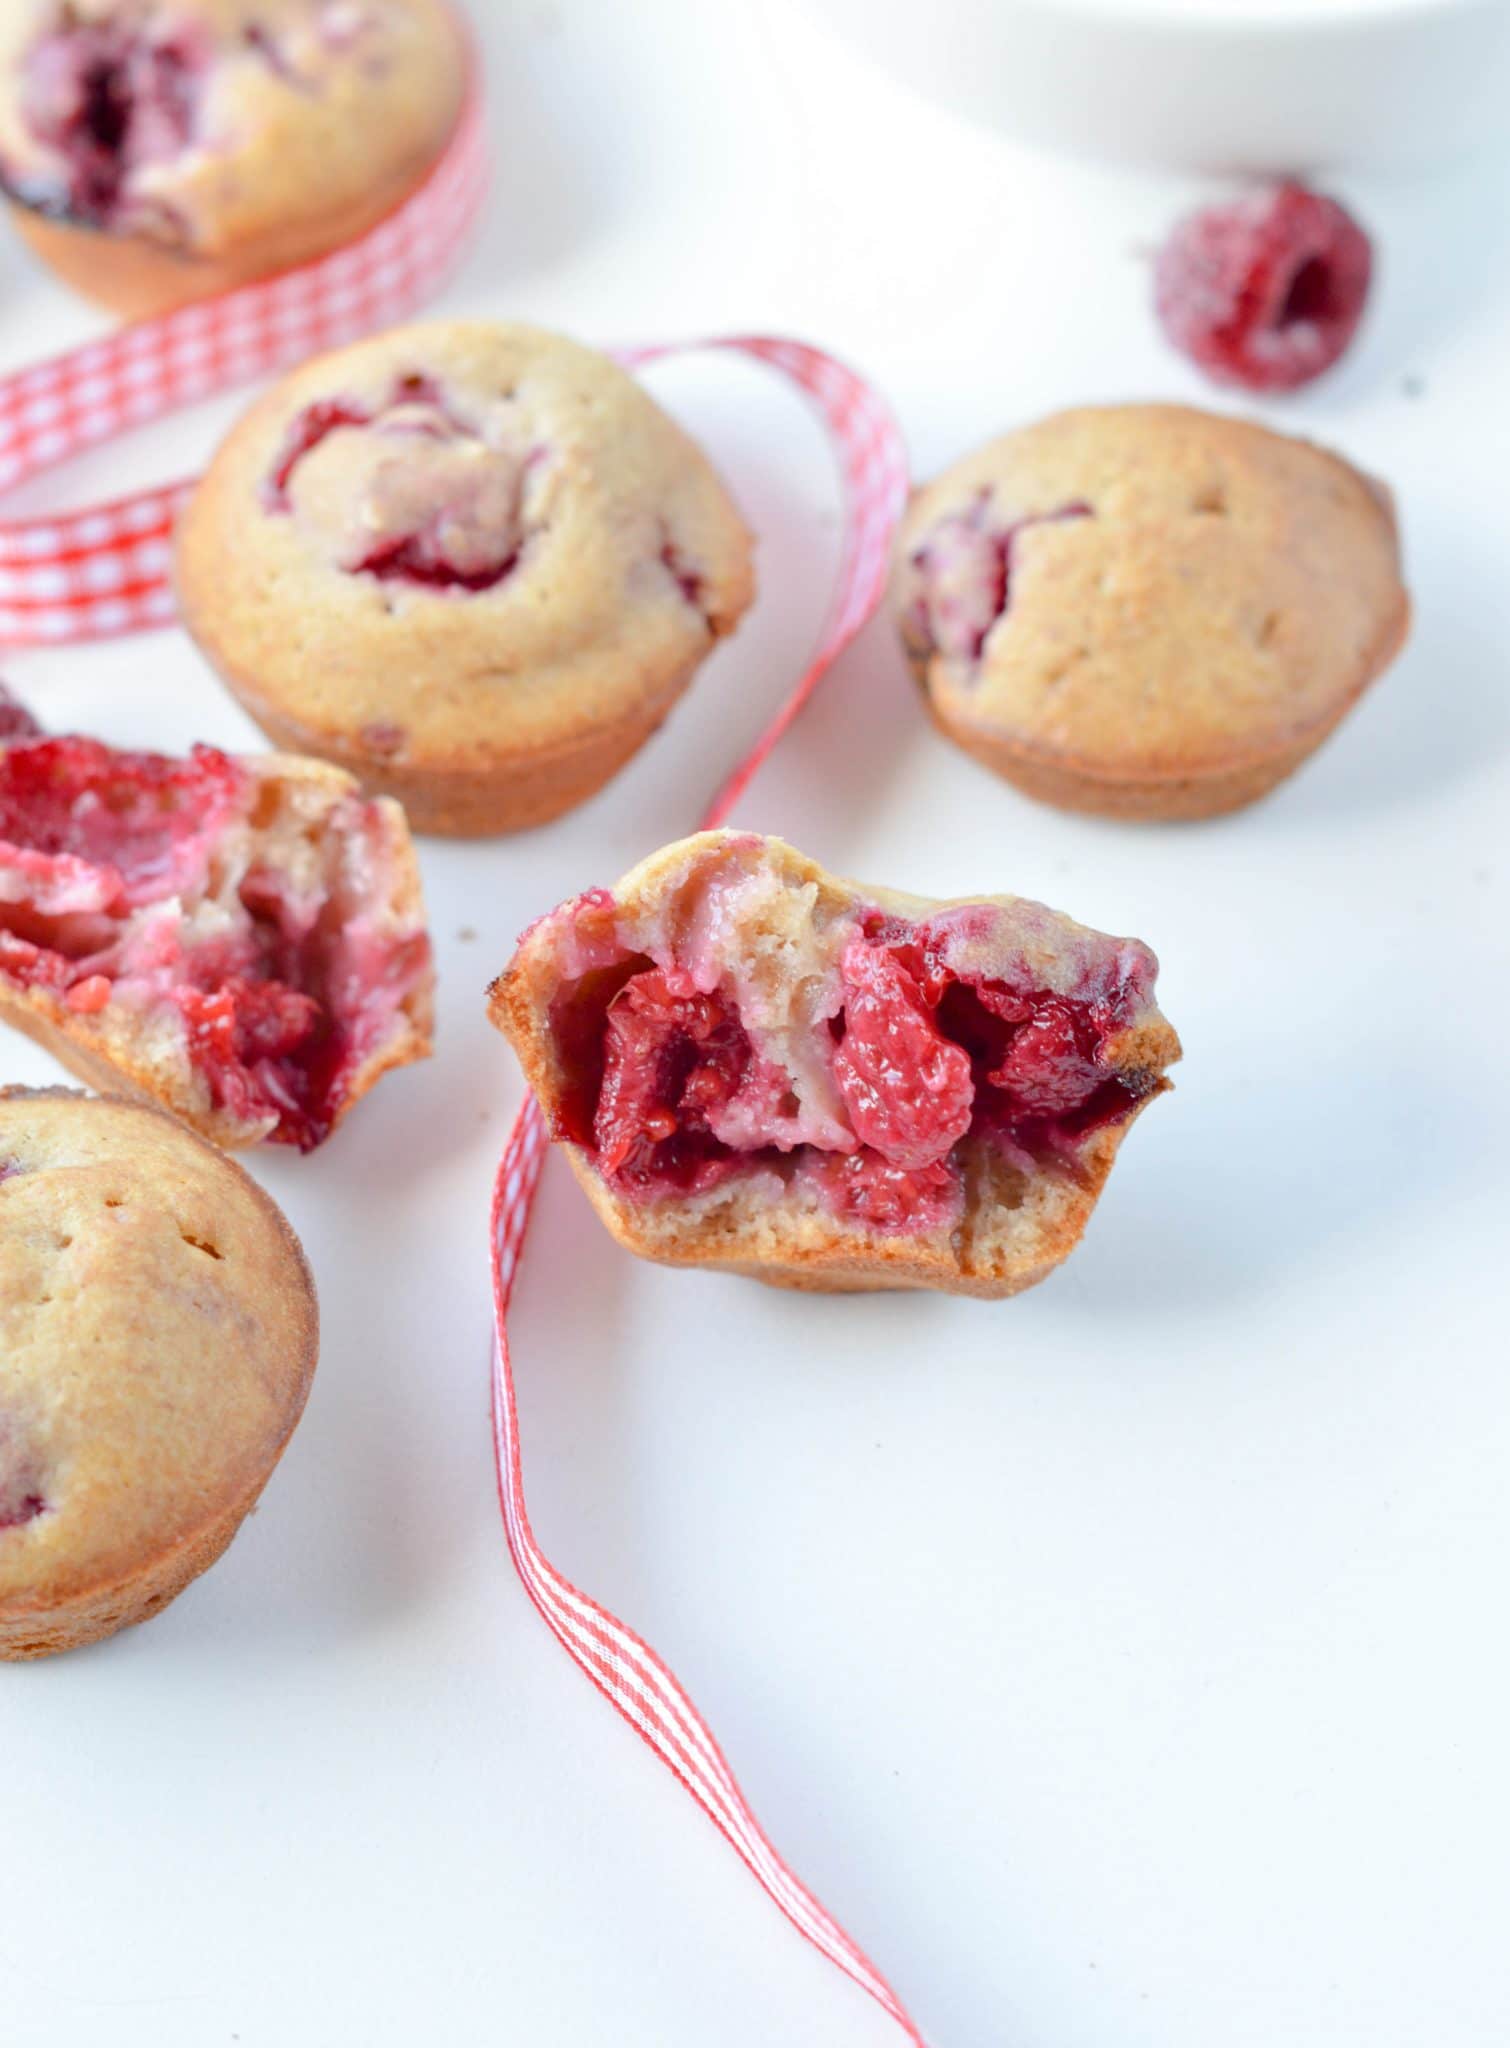 Keto raspberry muffins, a moist almond flour muffin recipe with 1 g net carb and juicy raspberries